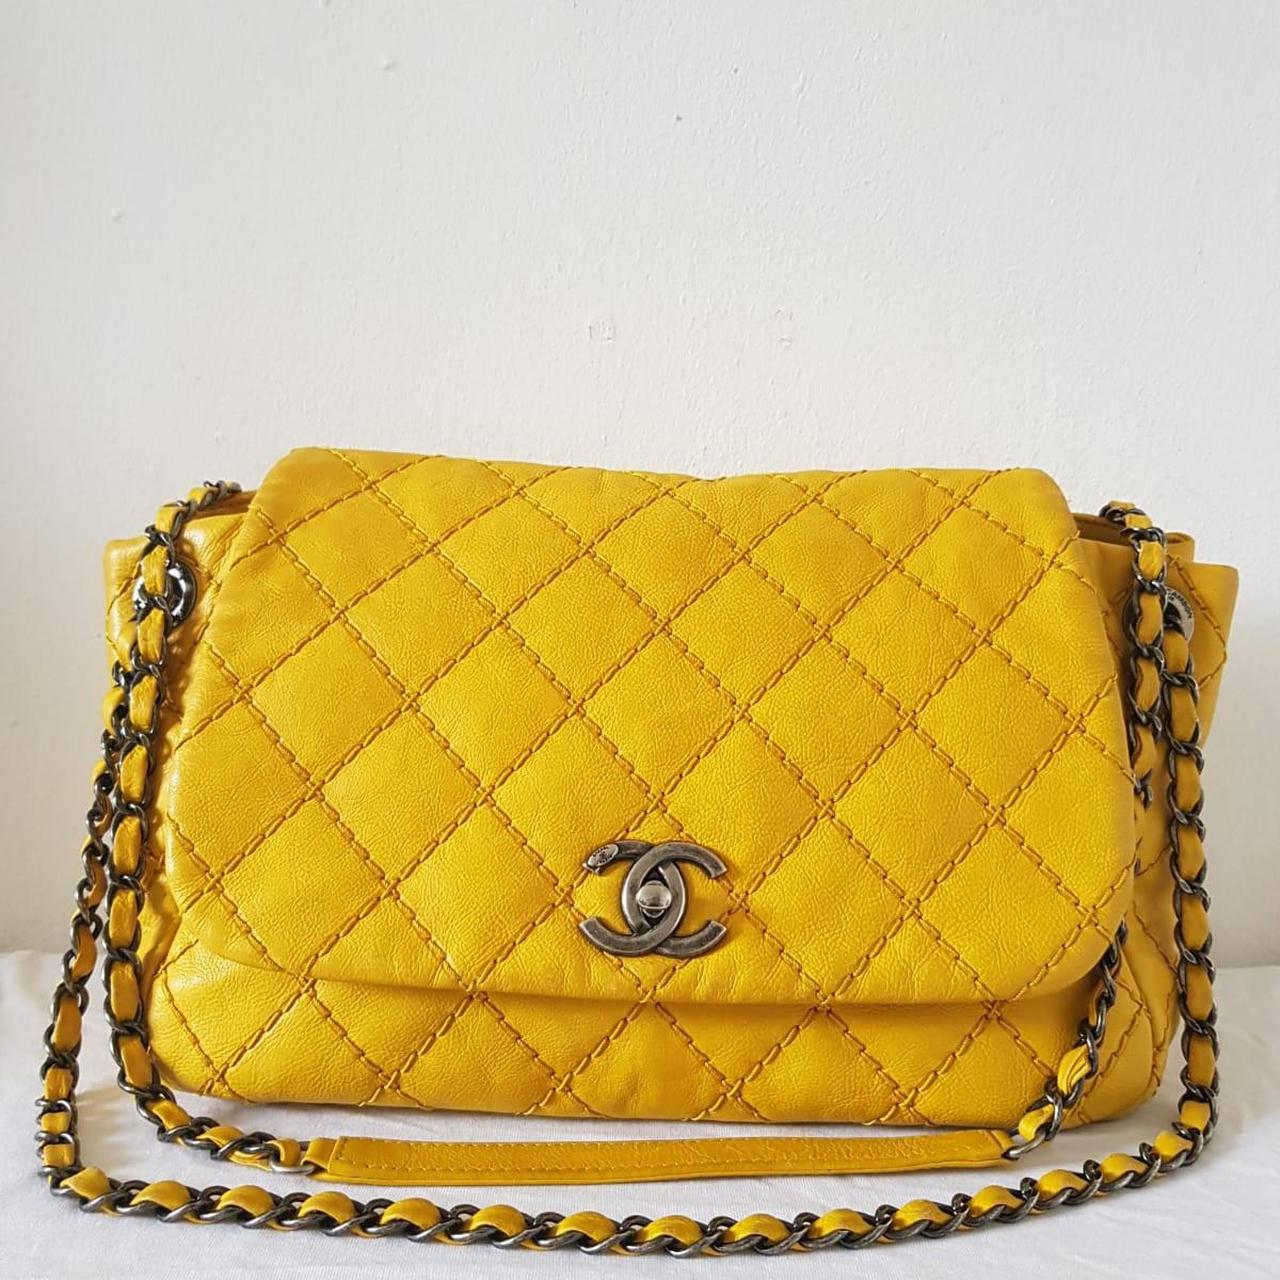 Chanel classic cross body bag., In excellent